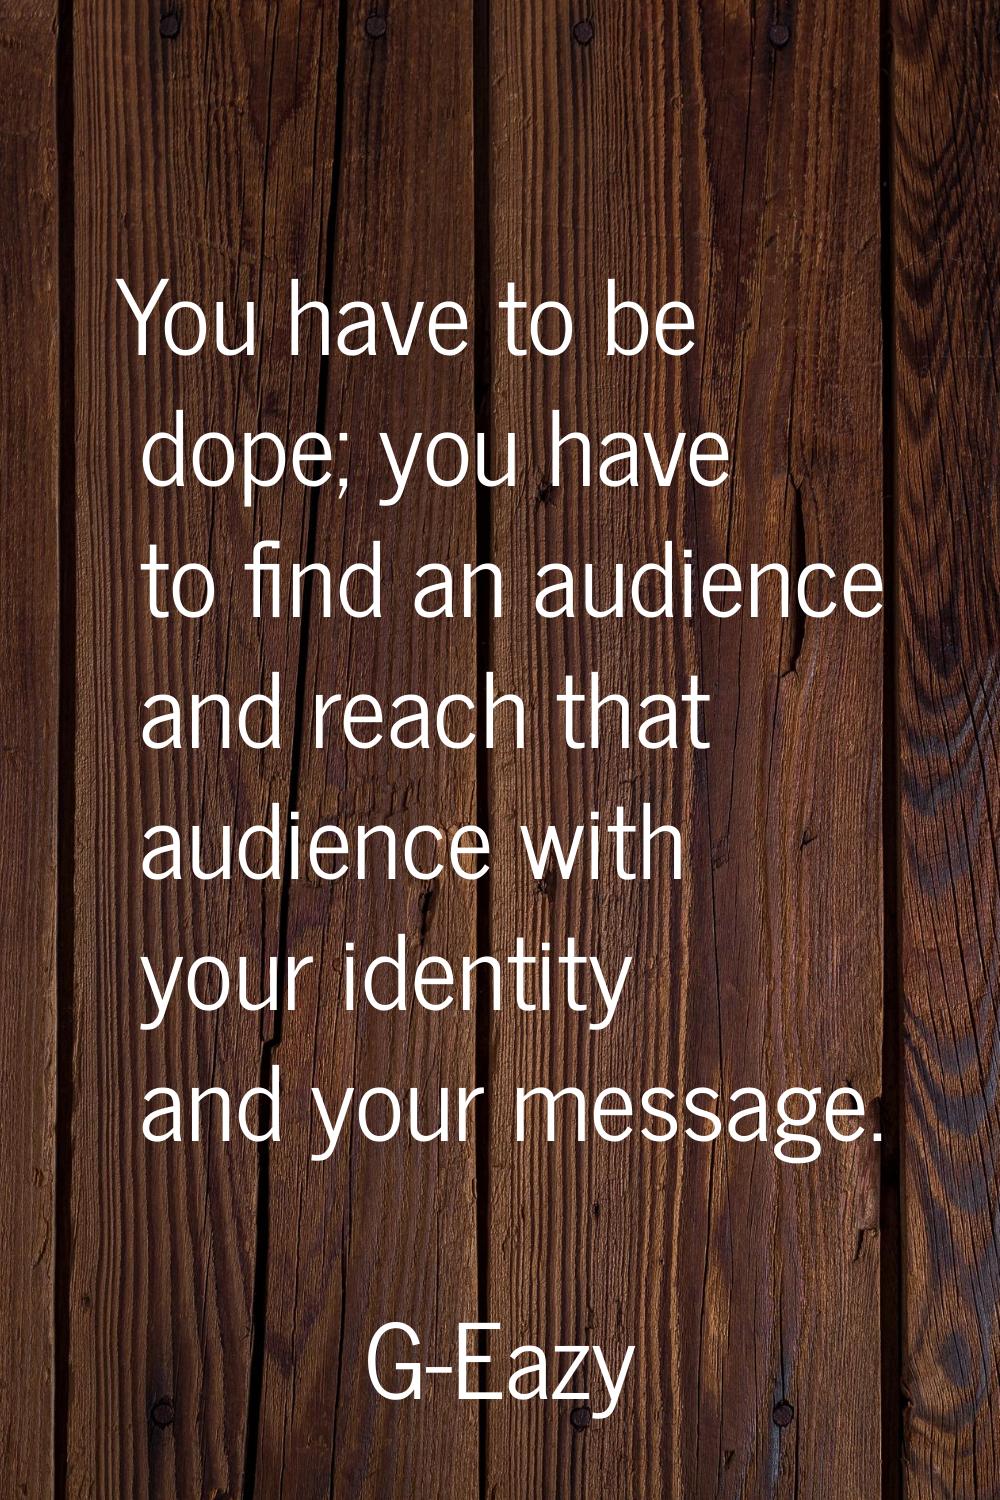 You have to be dope; you have to find an audience and reach that audience with your identity and yo